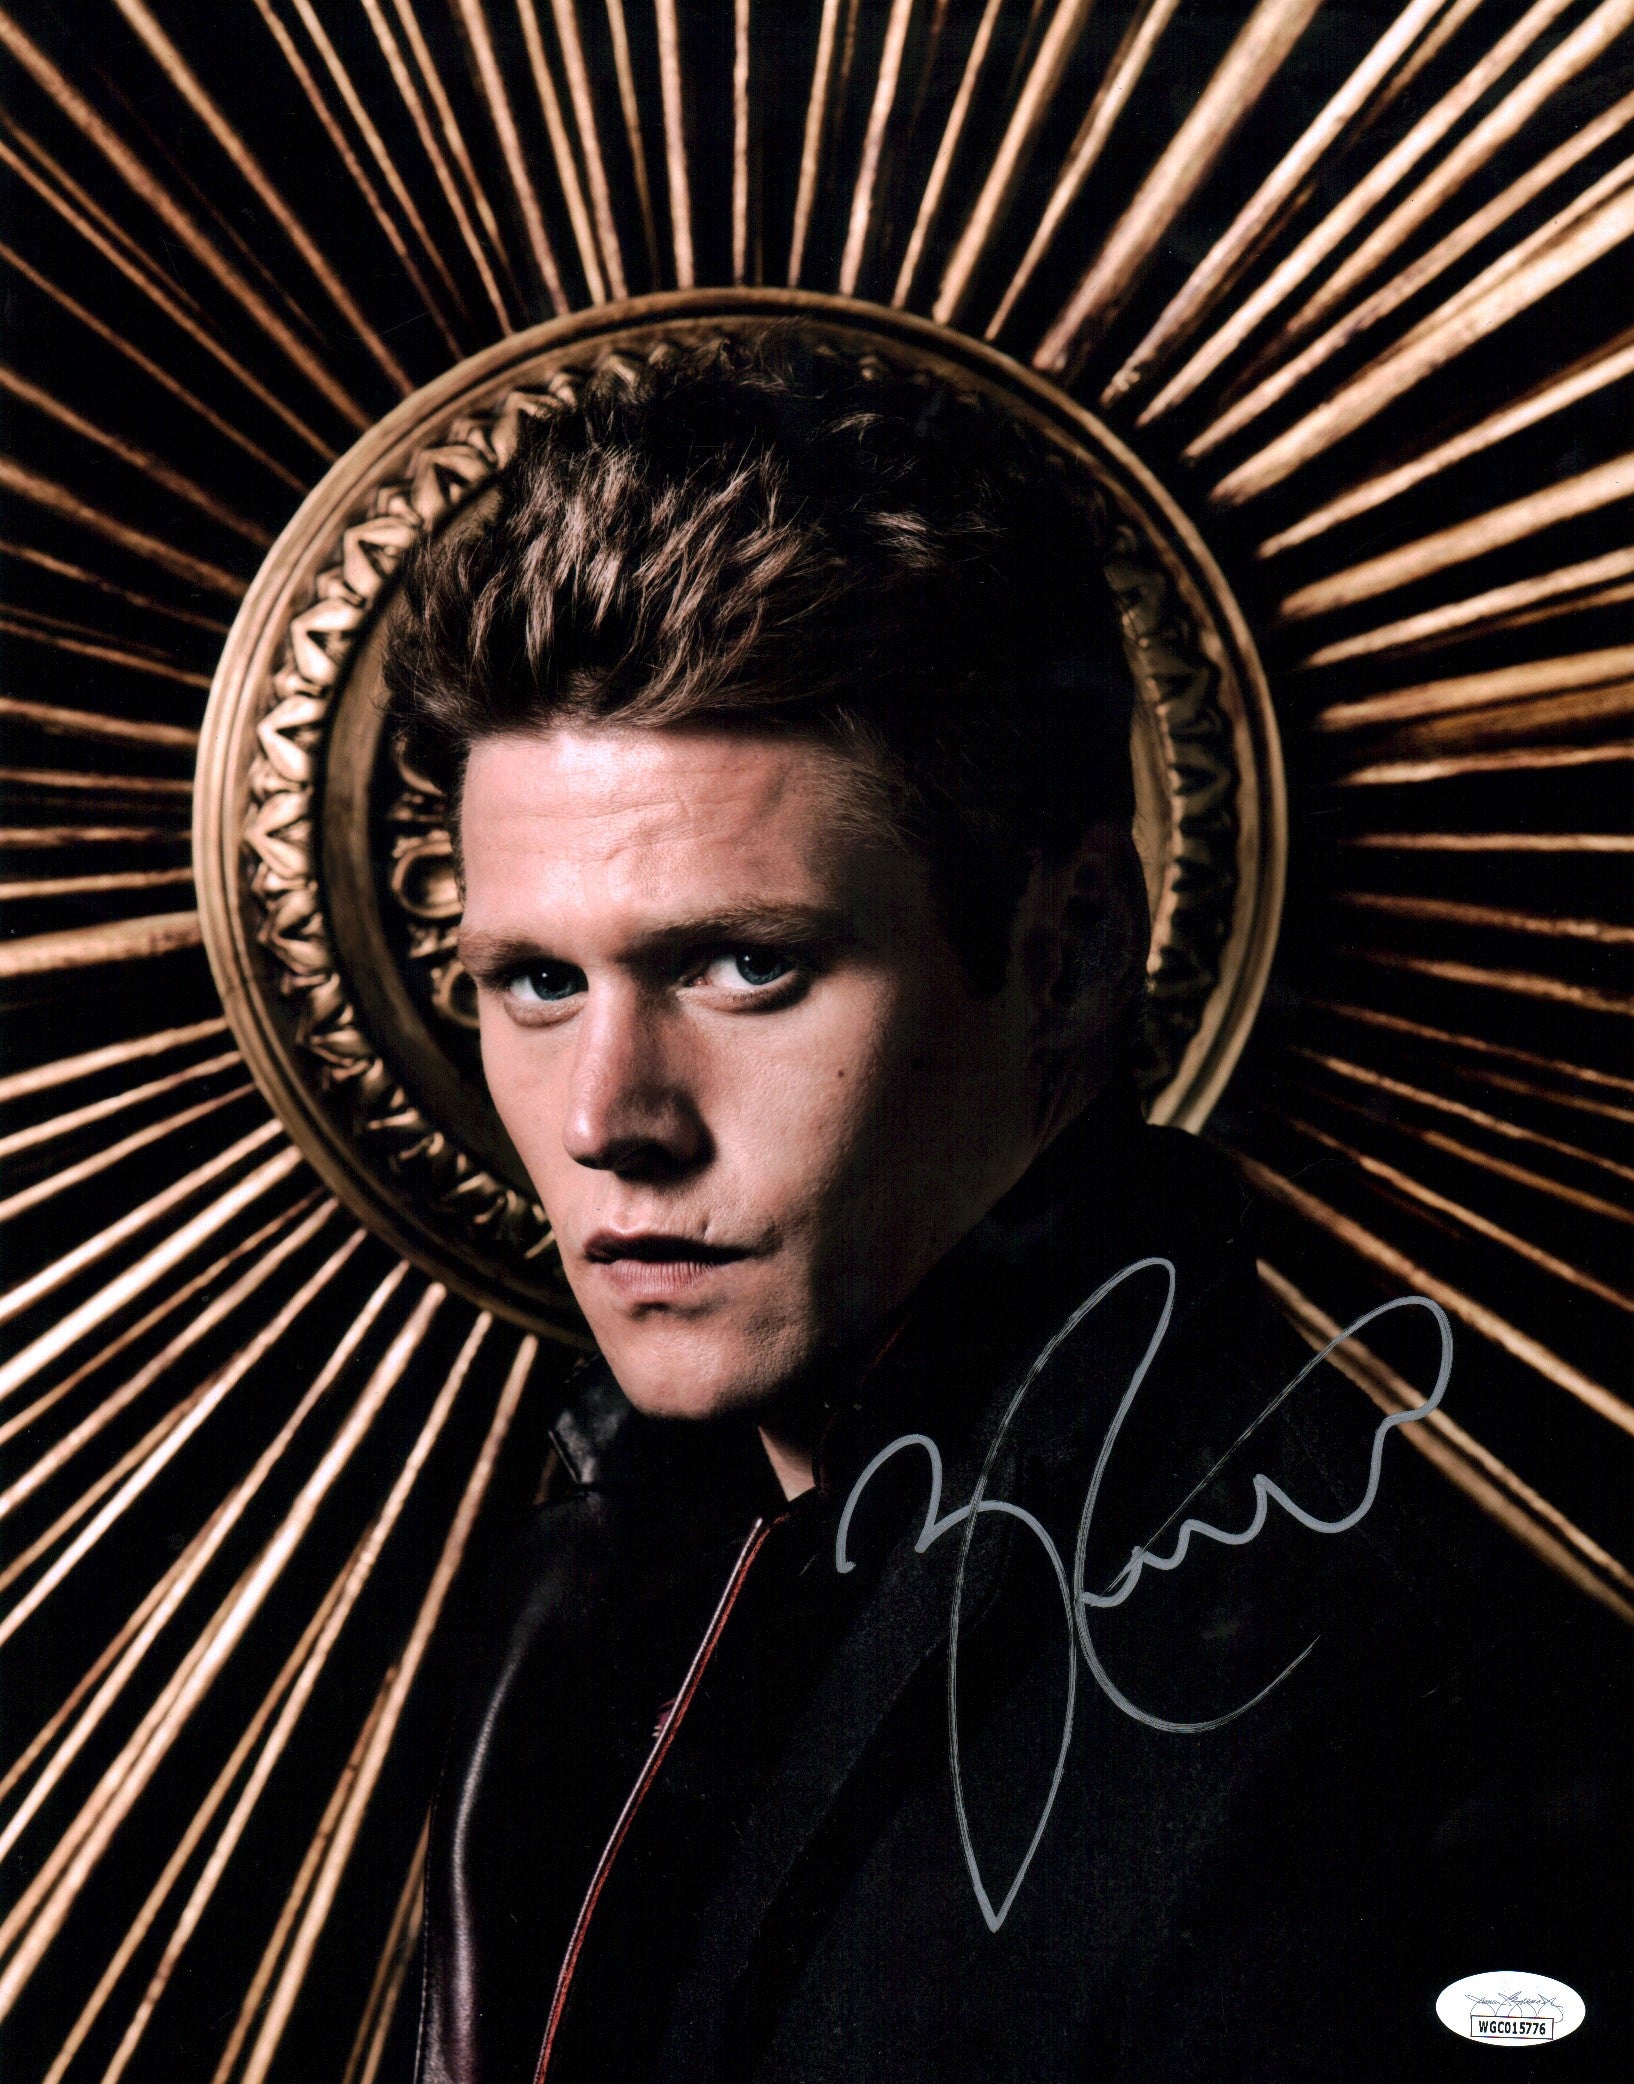 Zach Roerig The Vampire Diaries 11x14 Signed Autographed Photo Poster JSA COA Certified Autograph